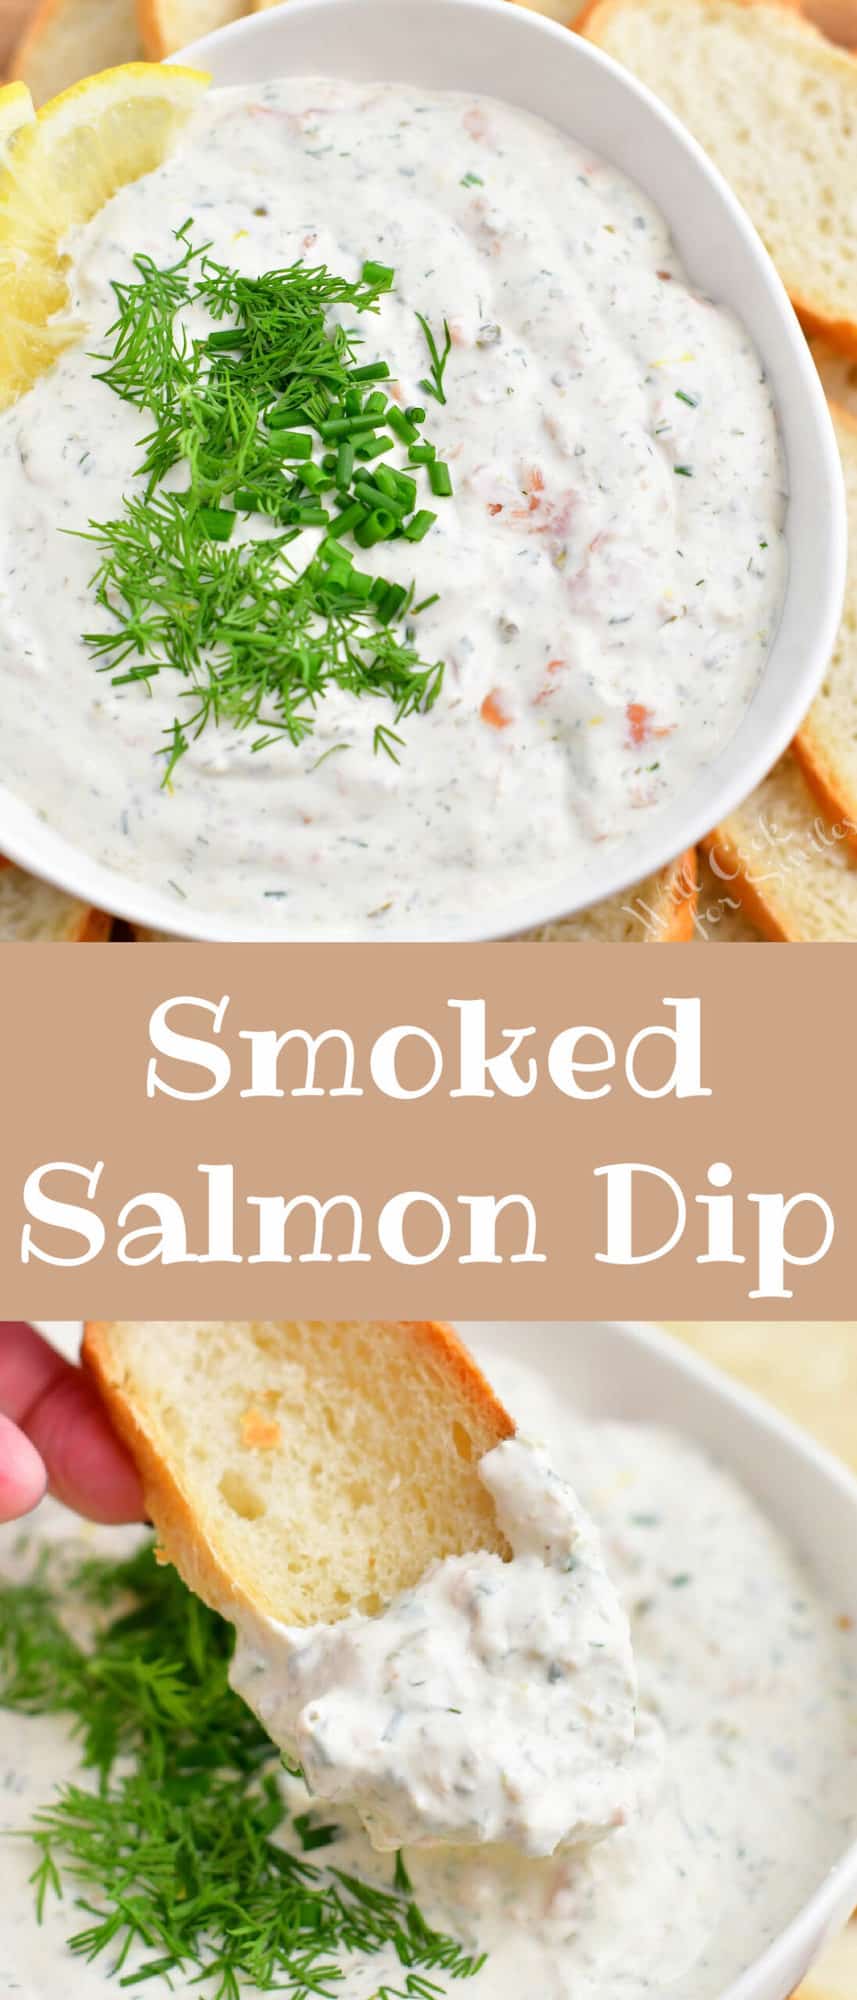 titled Pinterest photo (and shown in a bowl): Smoked Salmon Dip